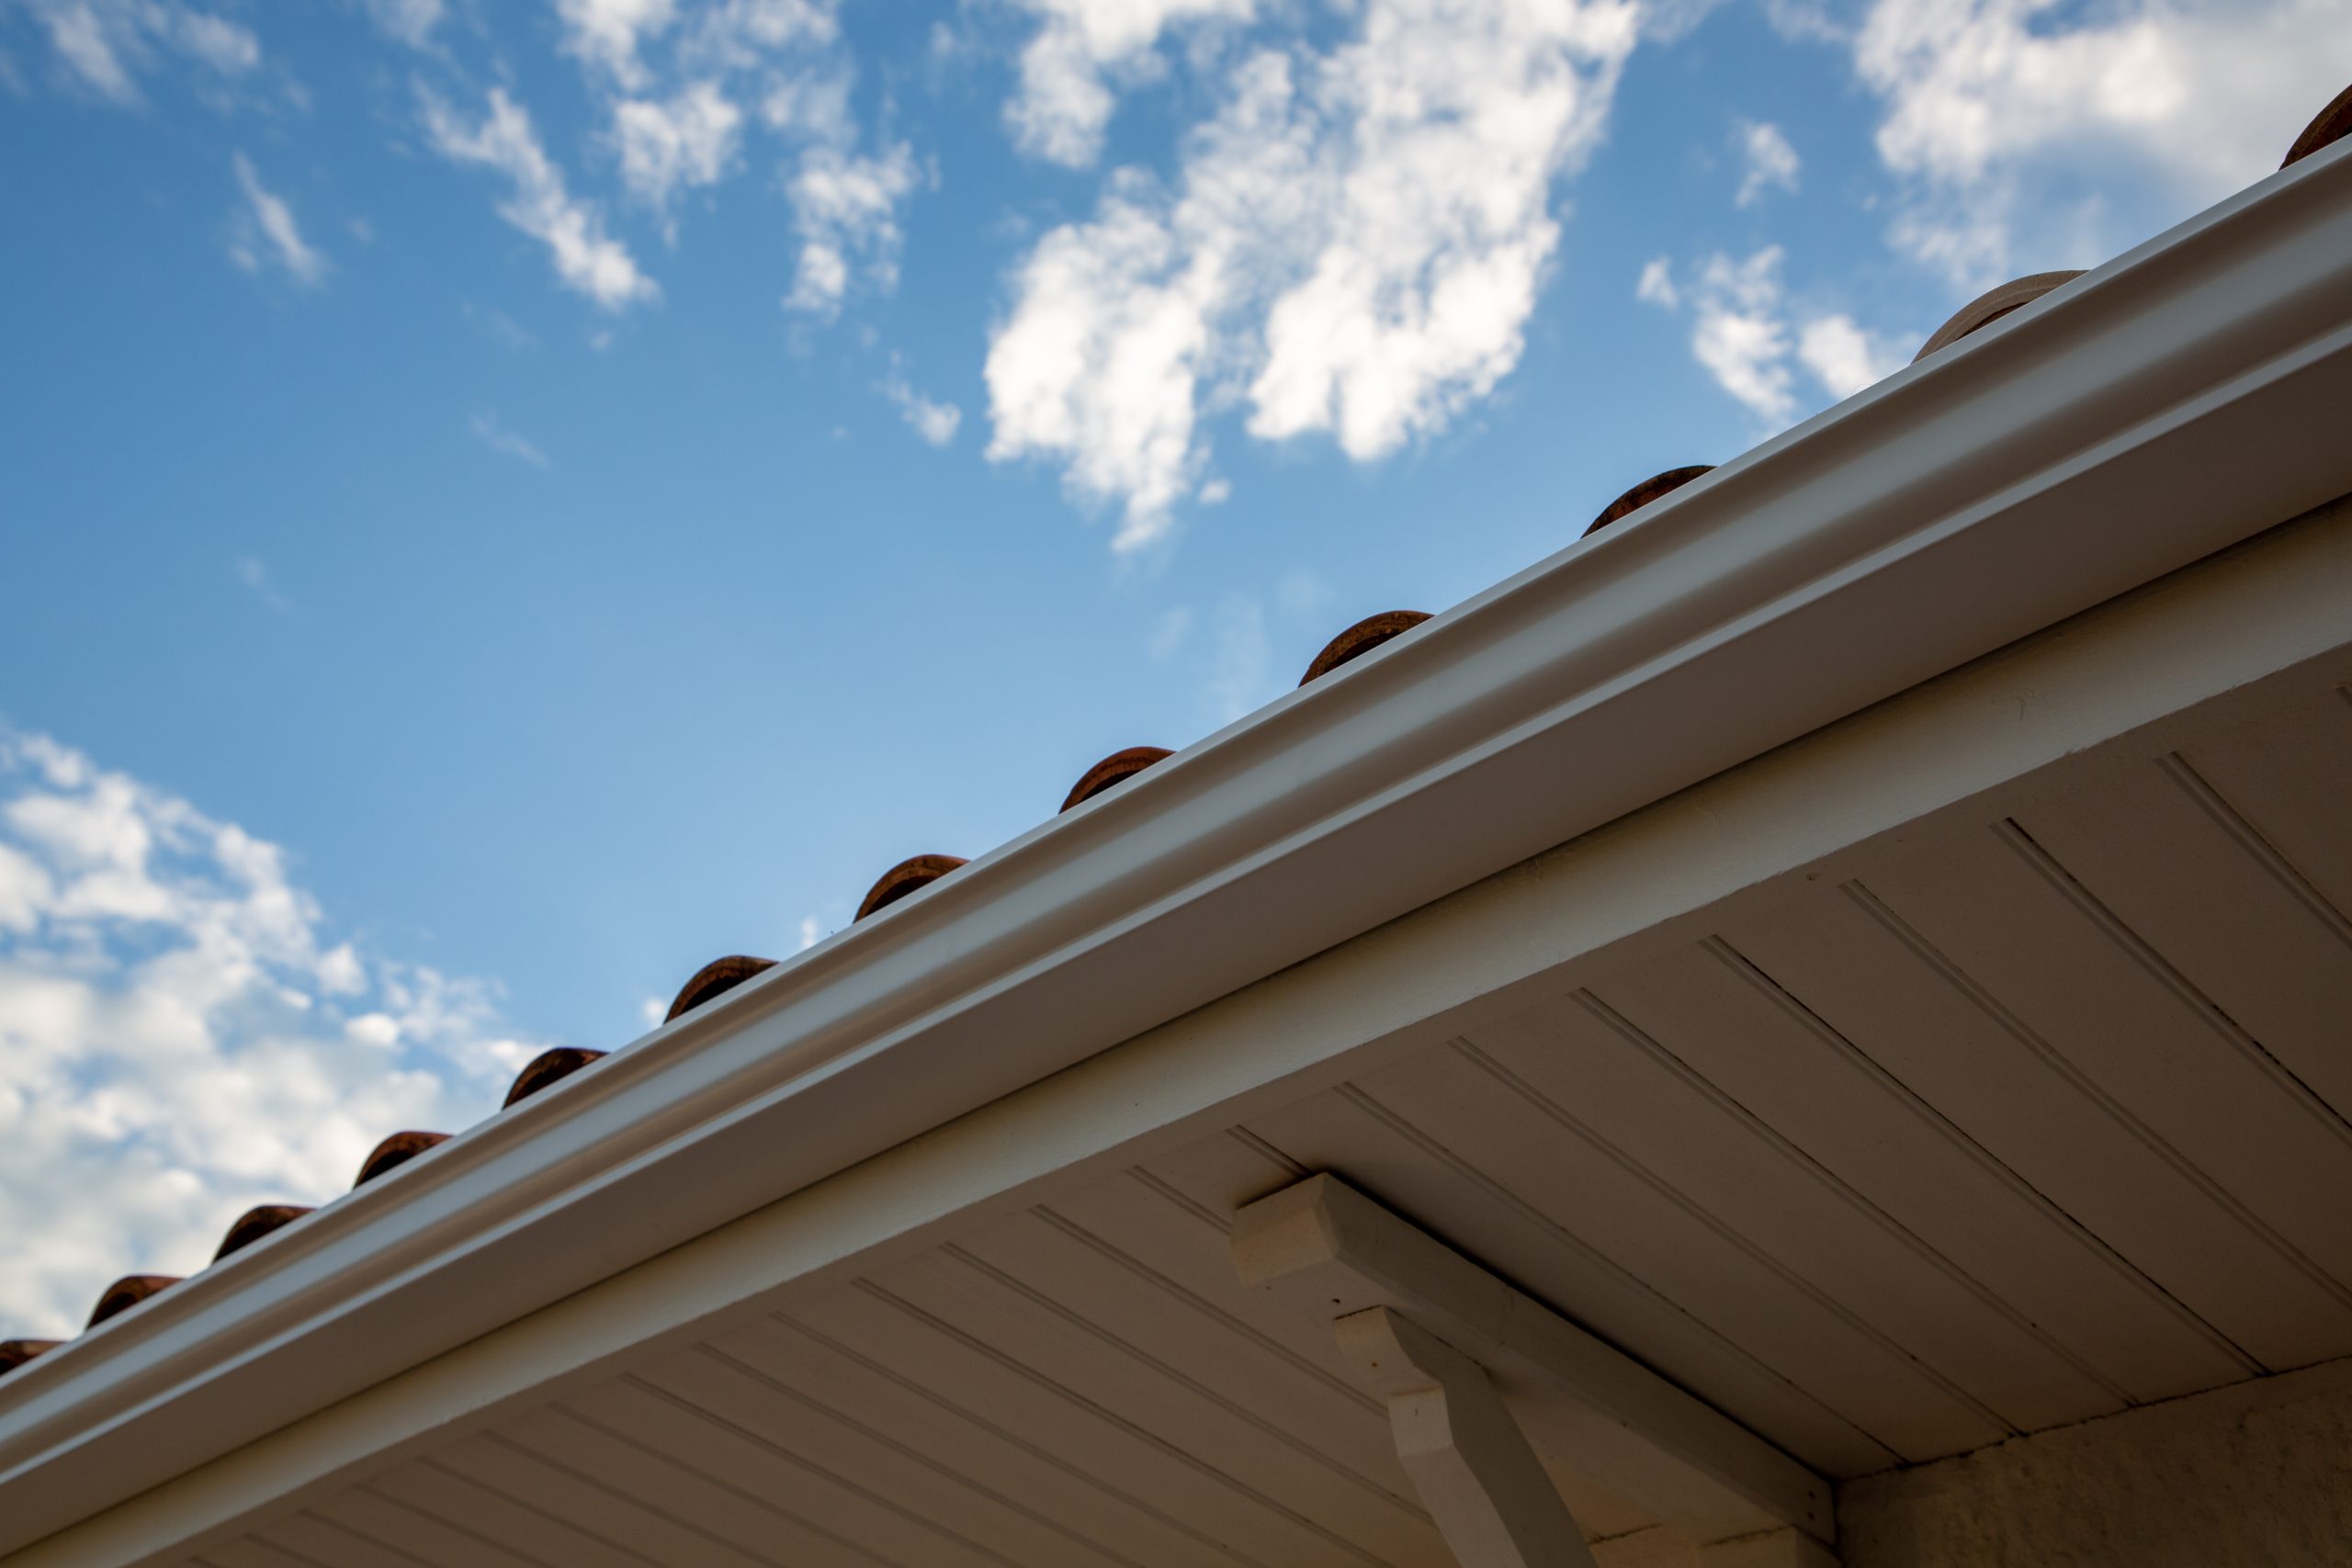 Close-up of seamless gutters against blue sky with clouds